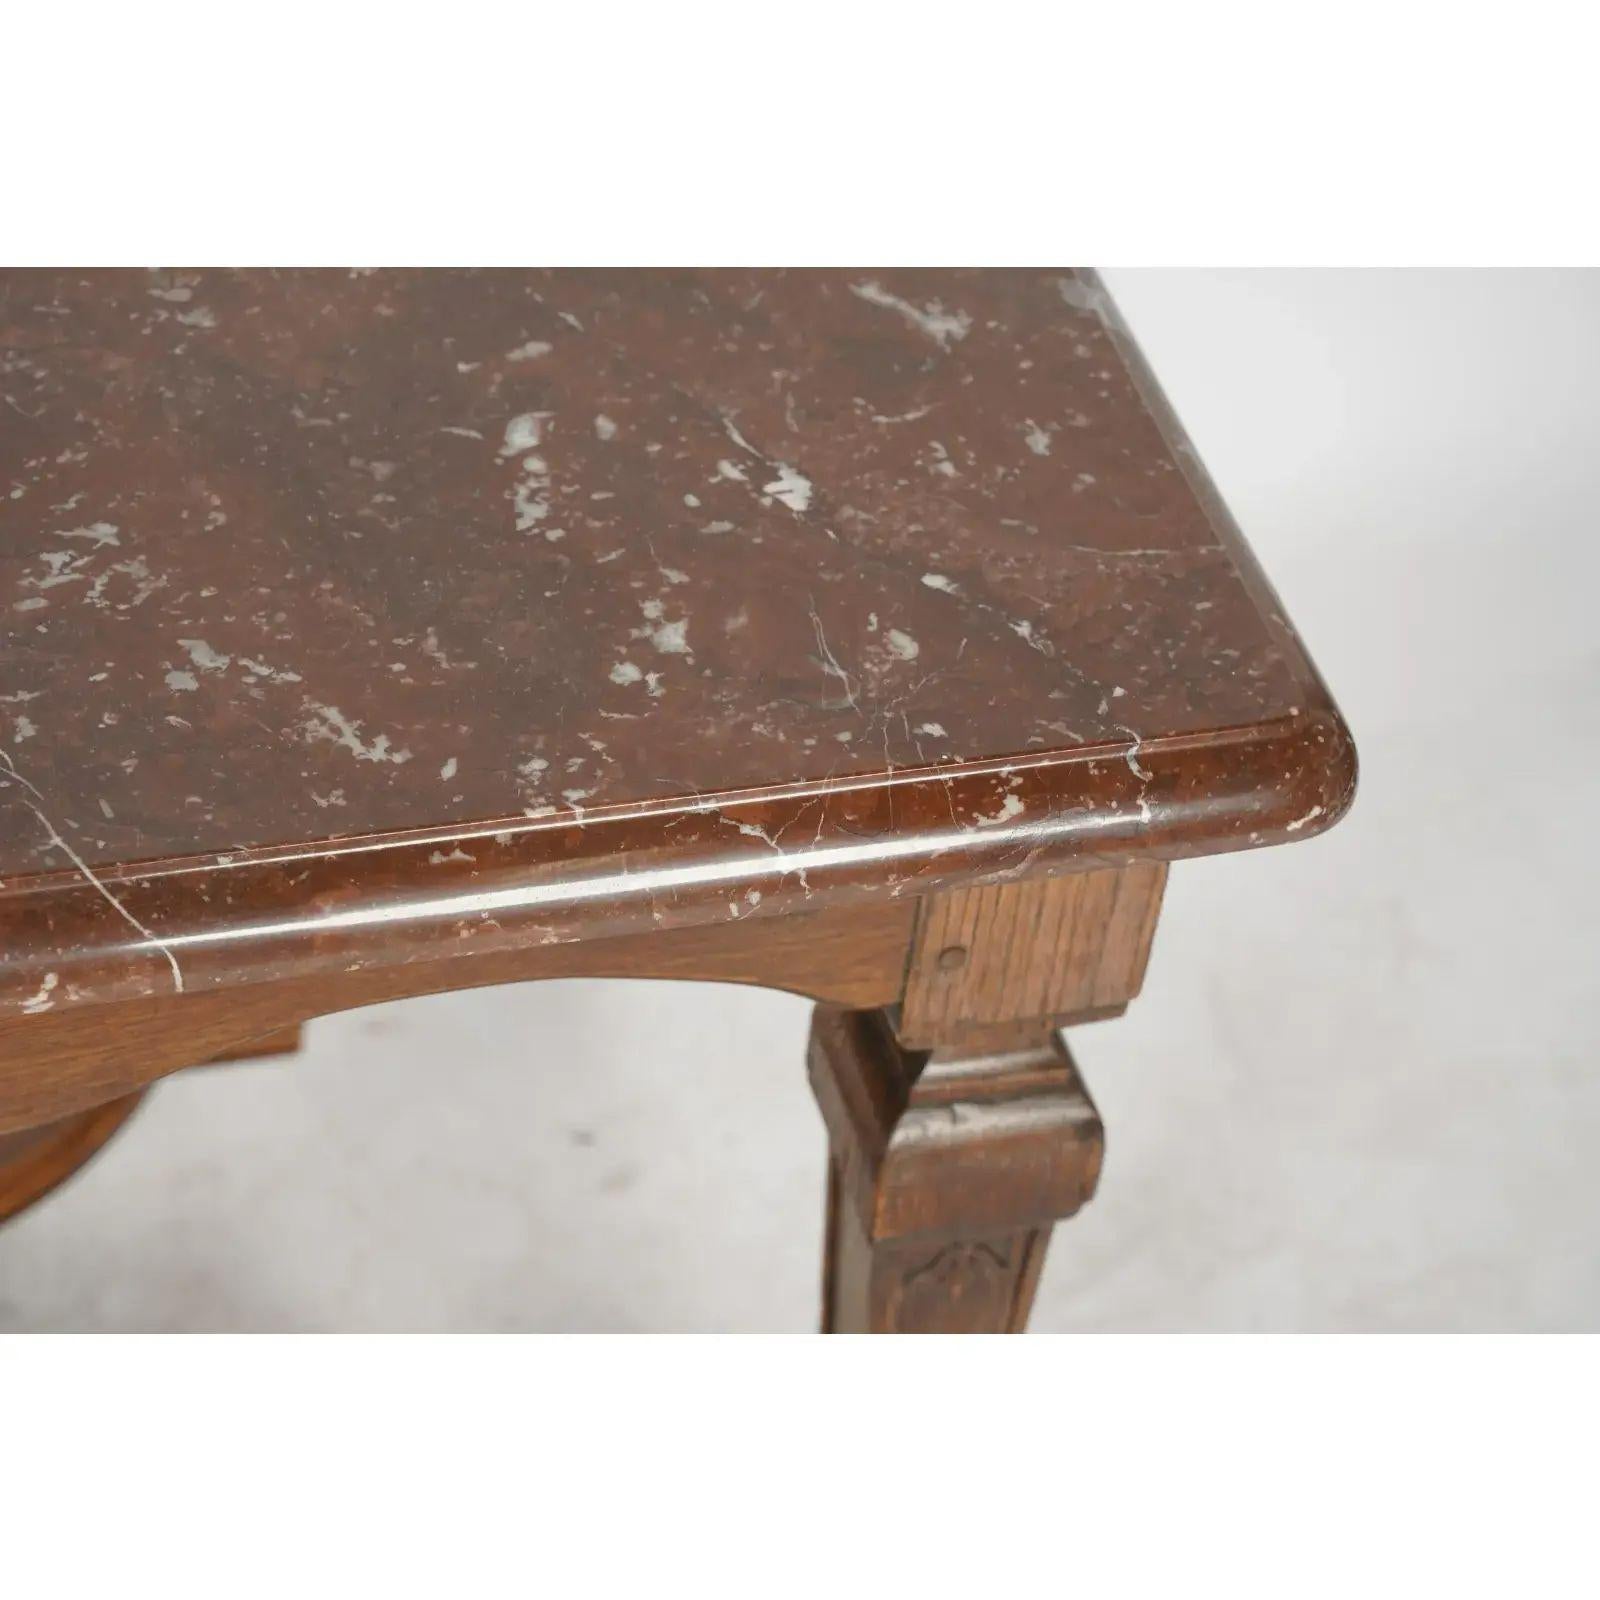 Antique Early 19th century Regence style oak & marble table

Provenance: The estate of Don Rickles.

Additional information: 
Materials: Marble, Oak
Color: Red
Period: Early 19th century
Styles: Regency
Table Shape: Rectangle
Item Type: